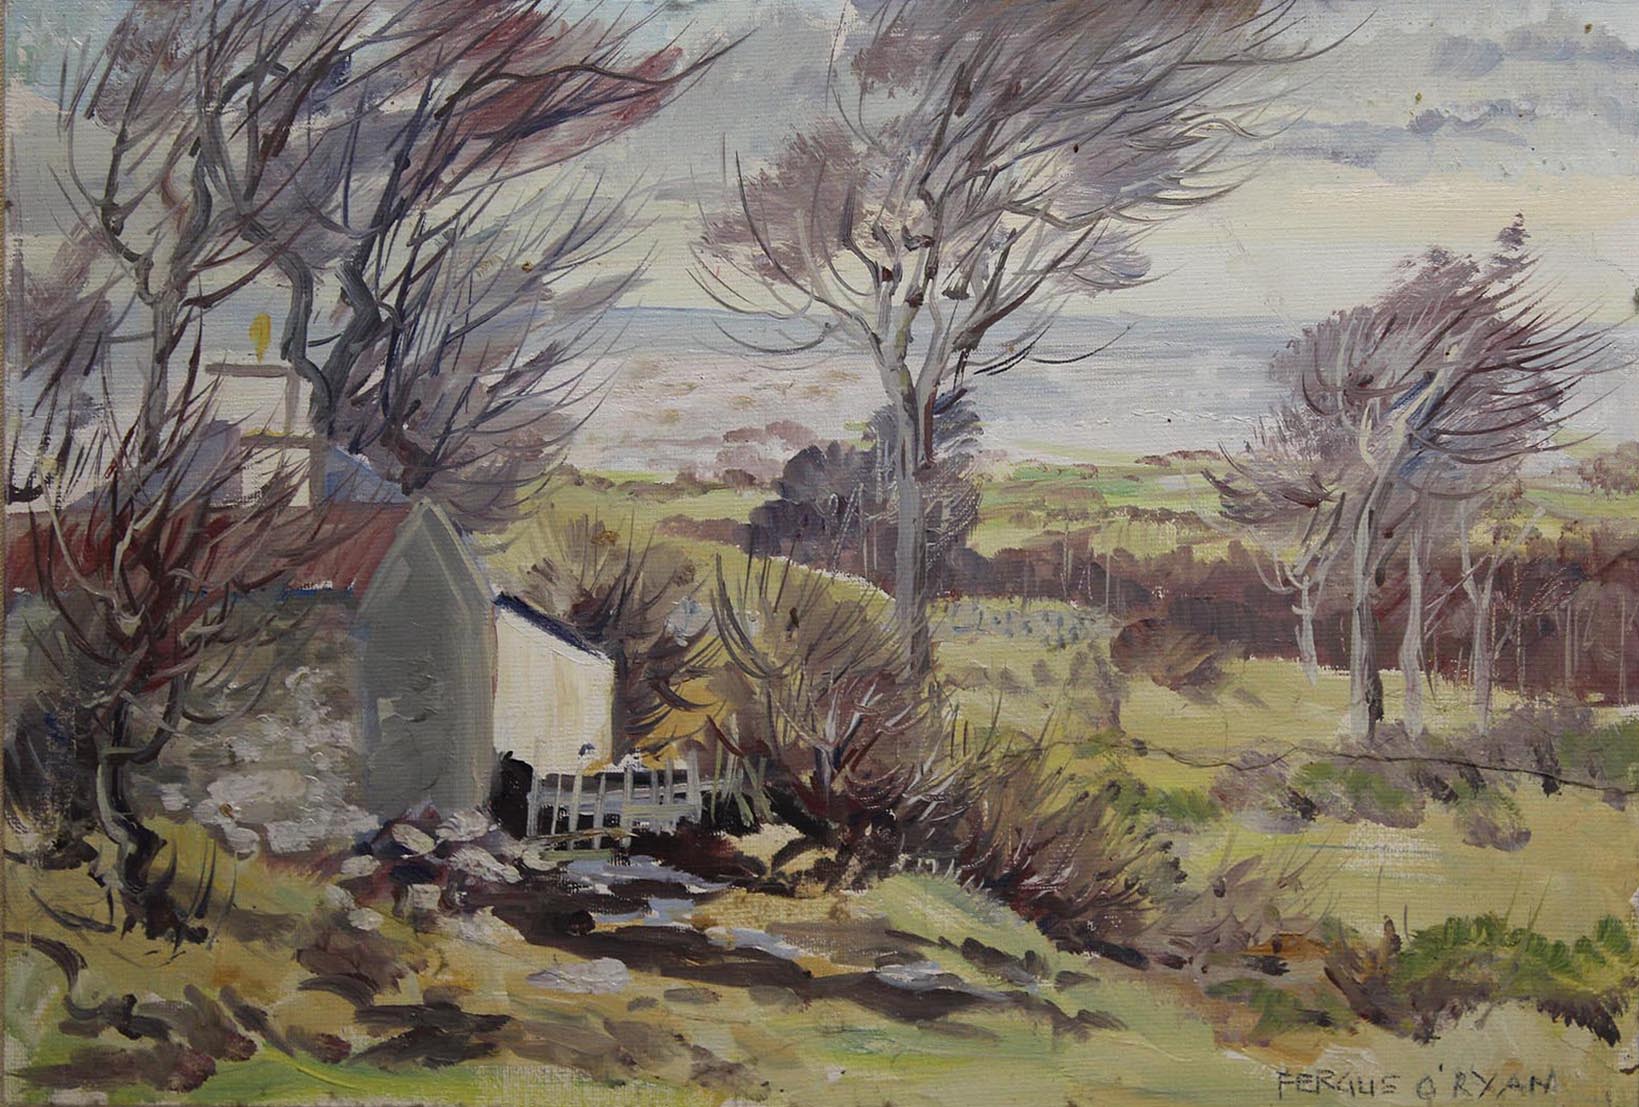 Fergus O'Ryan COUNTRY COTTAGE Oil on board, 10" x 14 1/2" (25.5  x 38.8 cm), signed